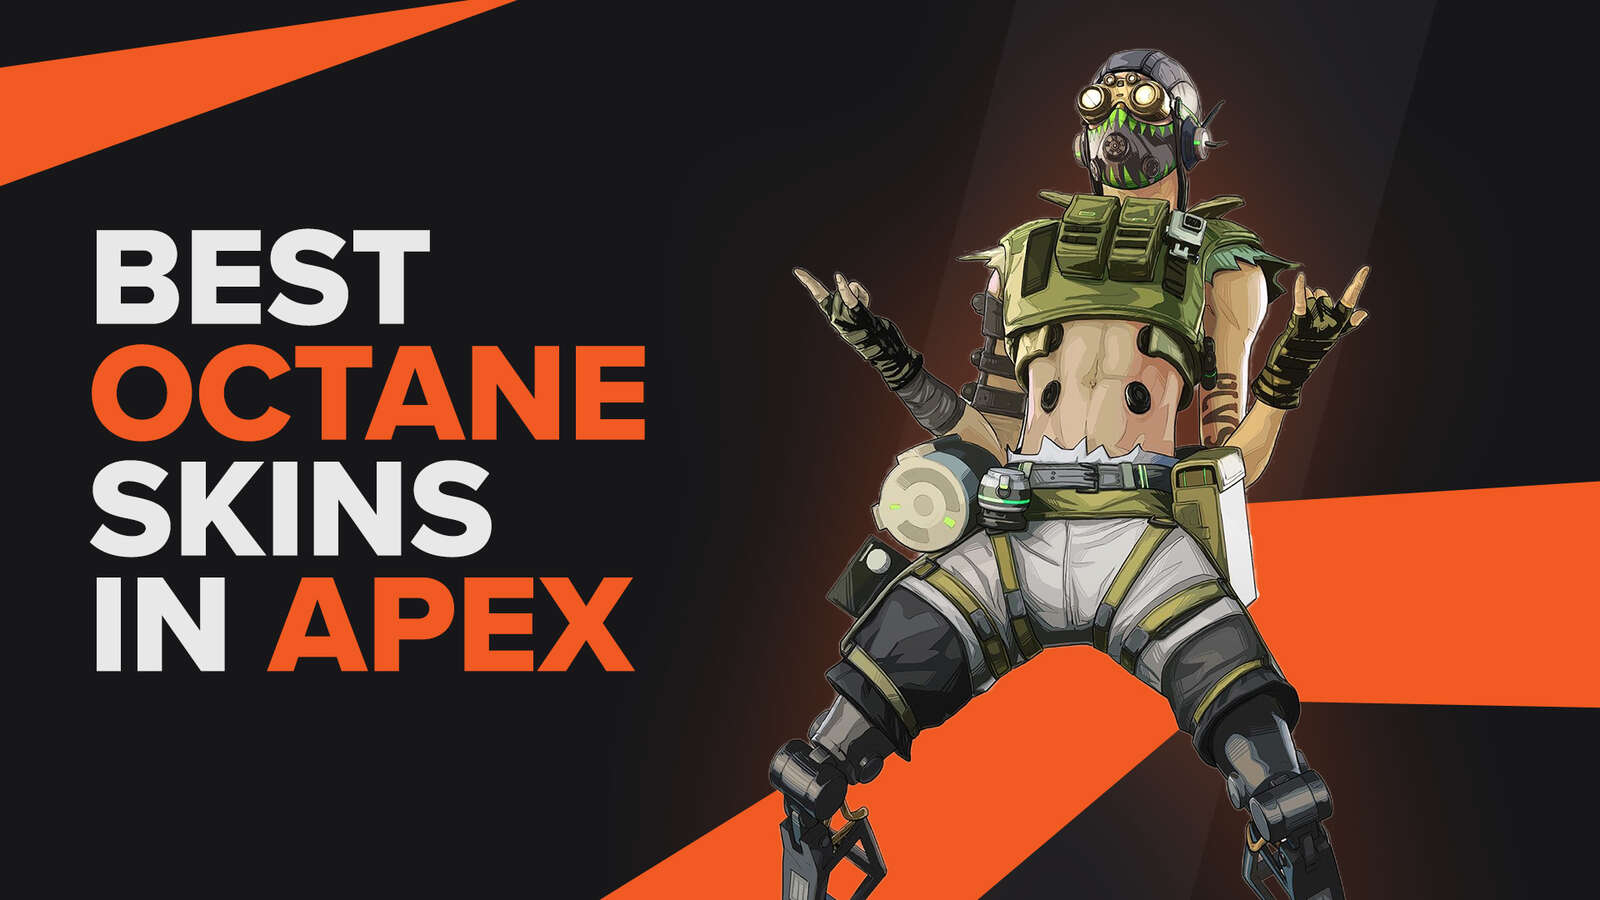 Best Octane Skins In Apex Legends That Make You Stand Out